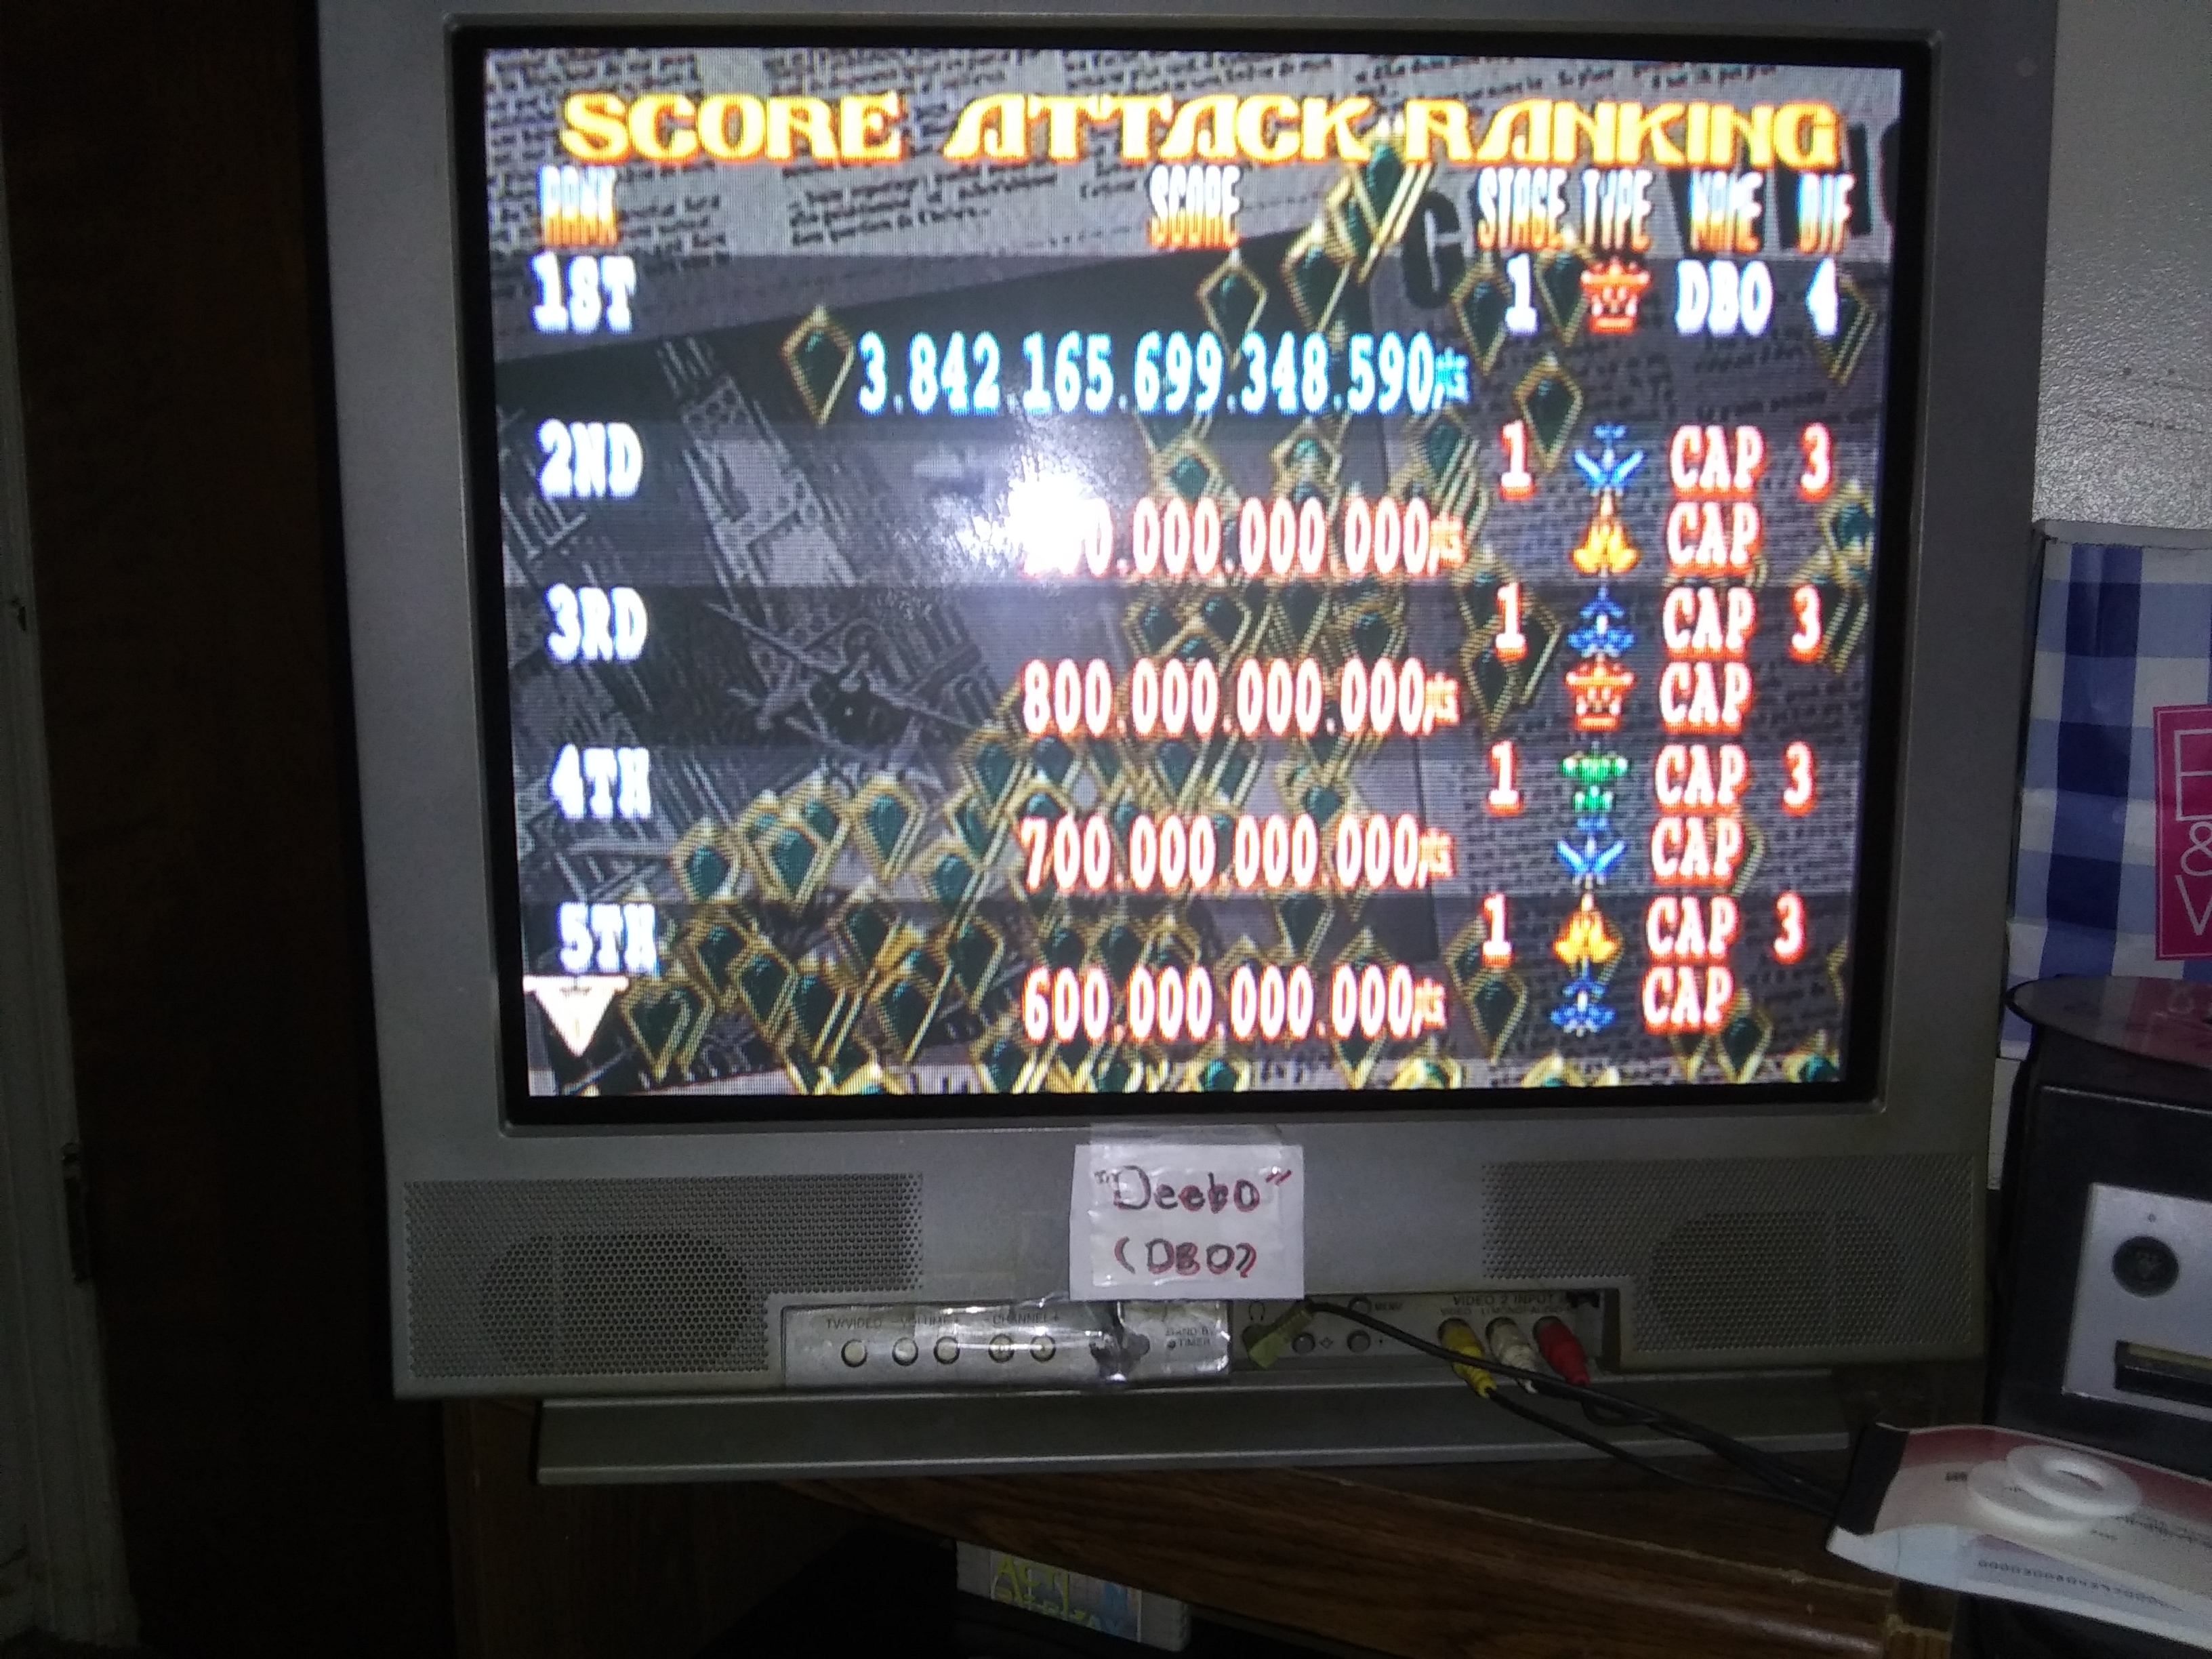 Deebo: Giga Wing 2: Score Attack: Stage 1 (Dreamcast) 3,842,165,669,348,590 points on 2019-03-20 21:34:30